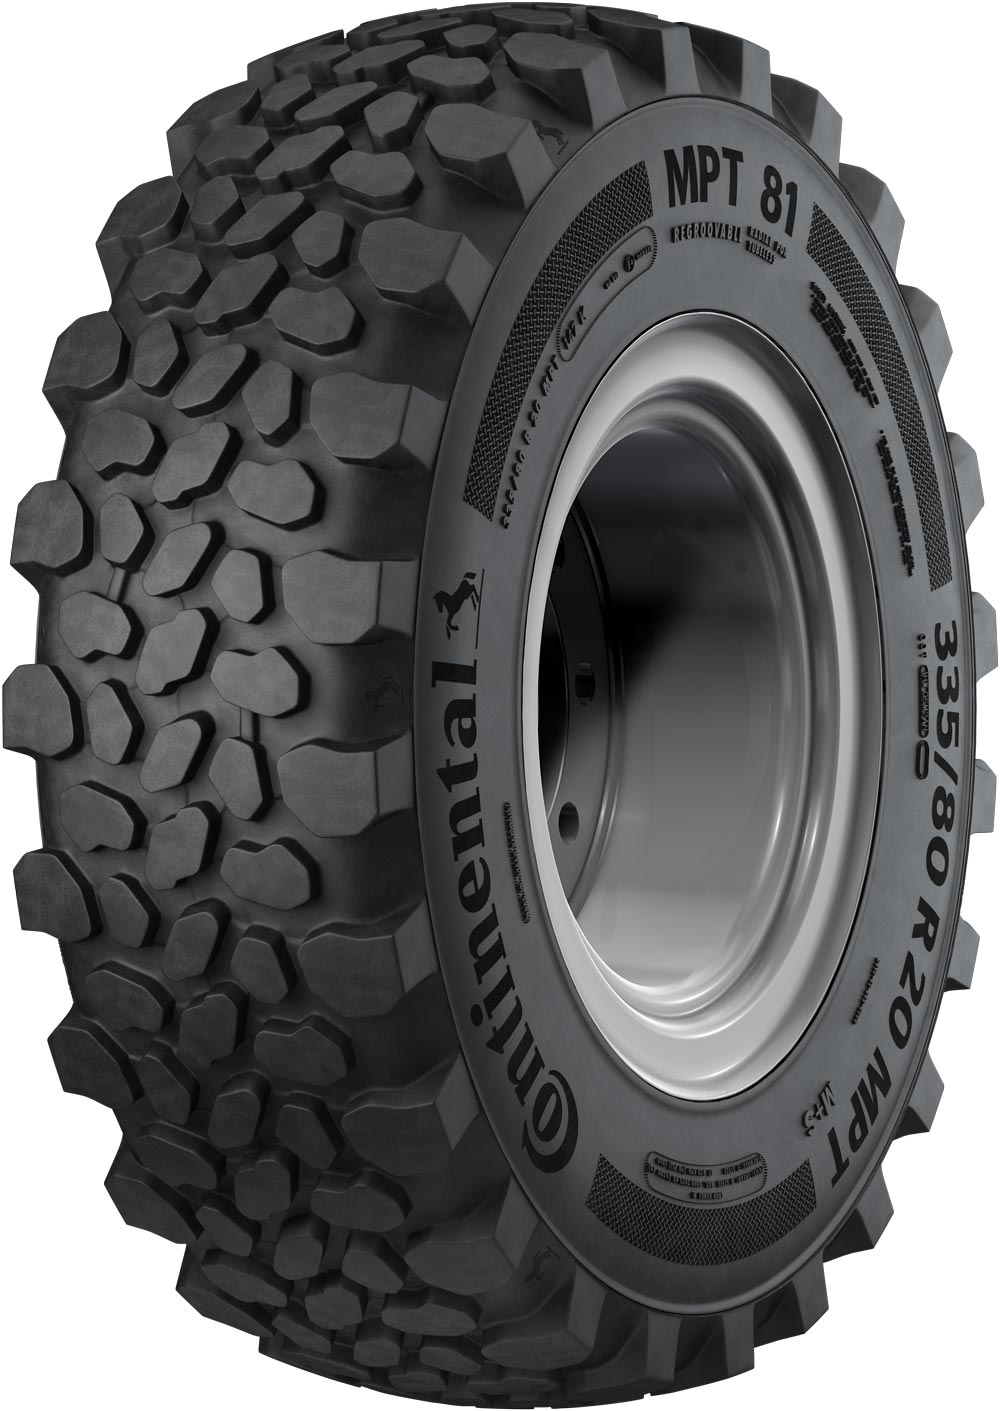 product_type-industrial_tires CONTINENTAL MPT81 TL 335/80 R20 R